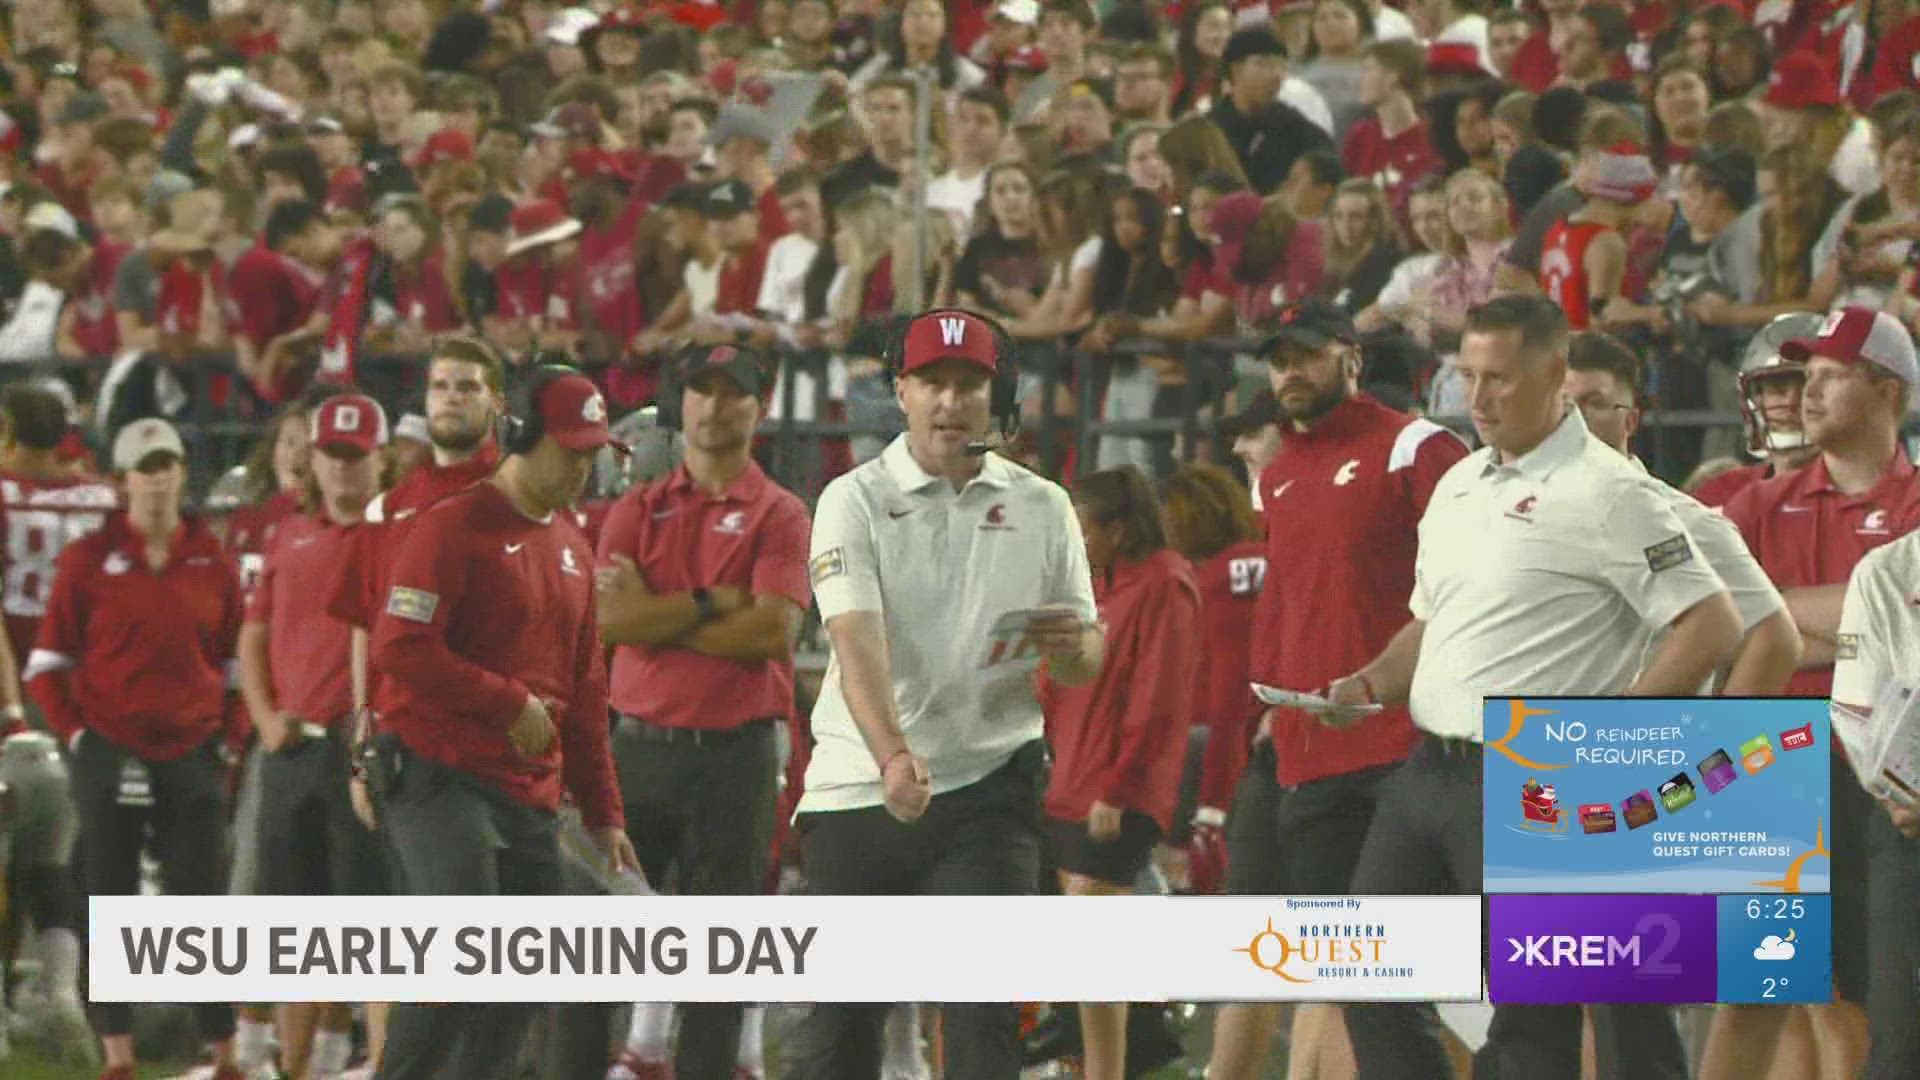 Wednesday marked the start of the early signing period for college football. Giving recruits their first chance to officially sign with programs.